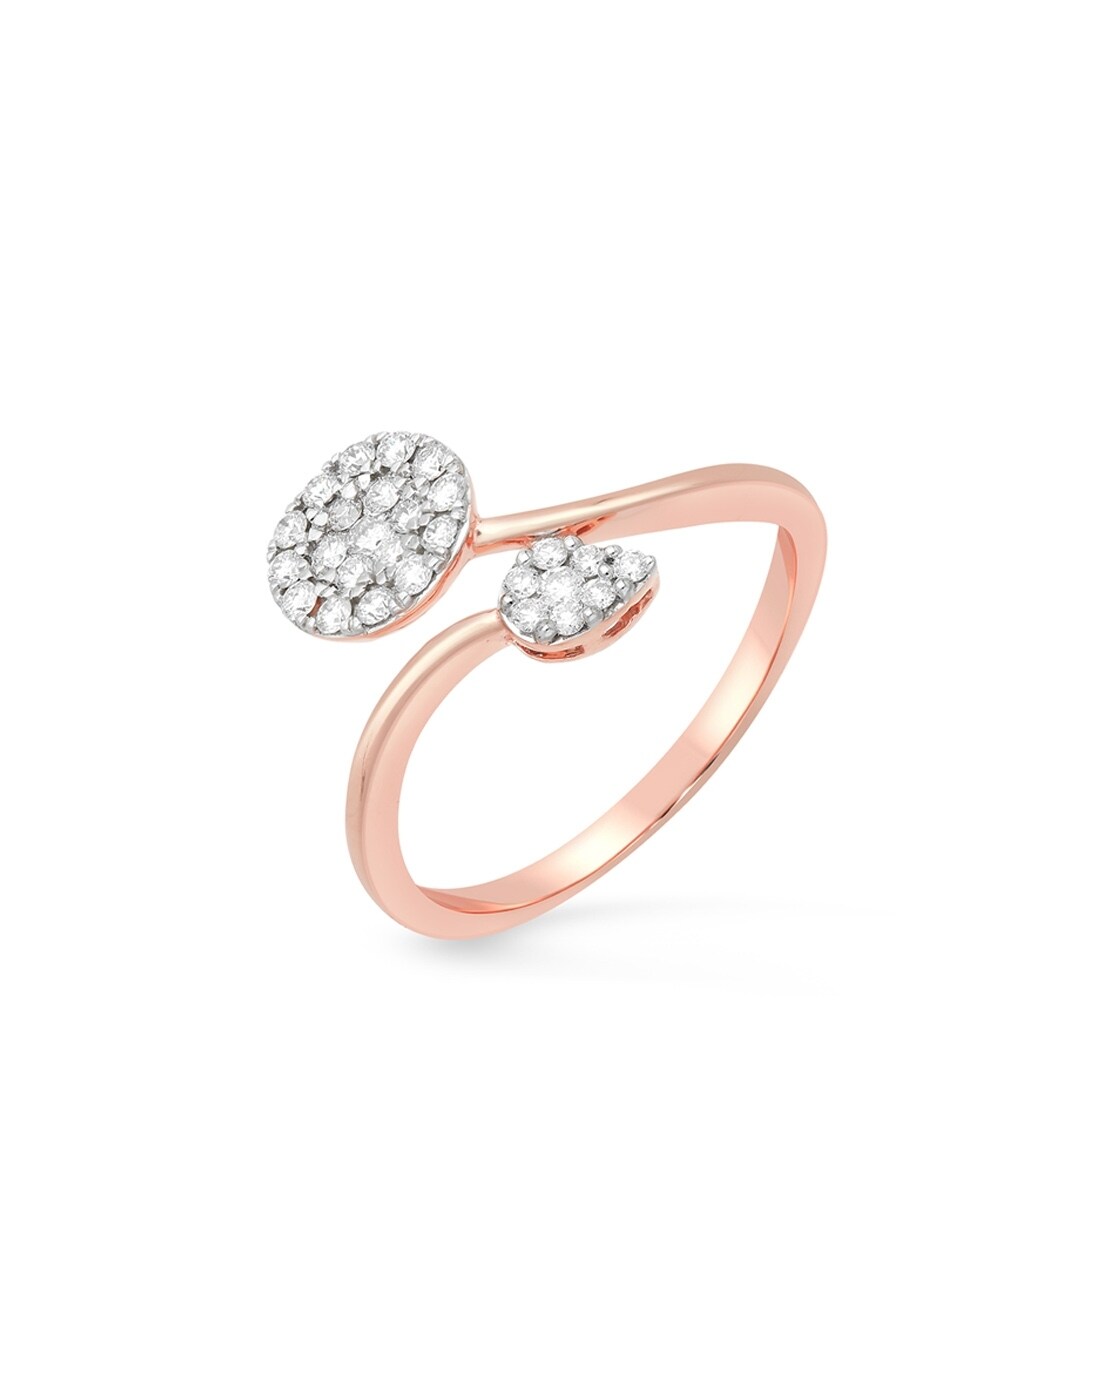 Buy Rose Gold Engagement Ring 0.80CT Champagne Diamond and Two Drop  Diamonds Online in India - Etsy